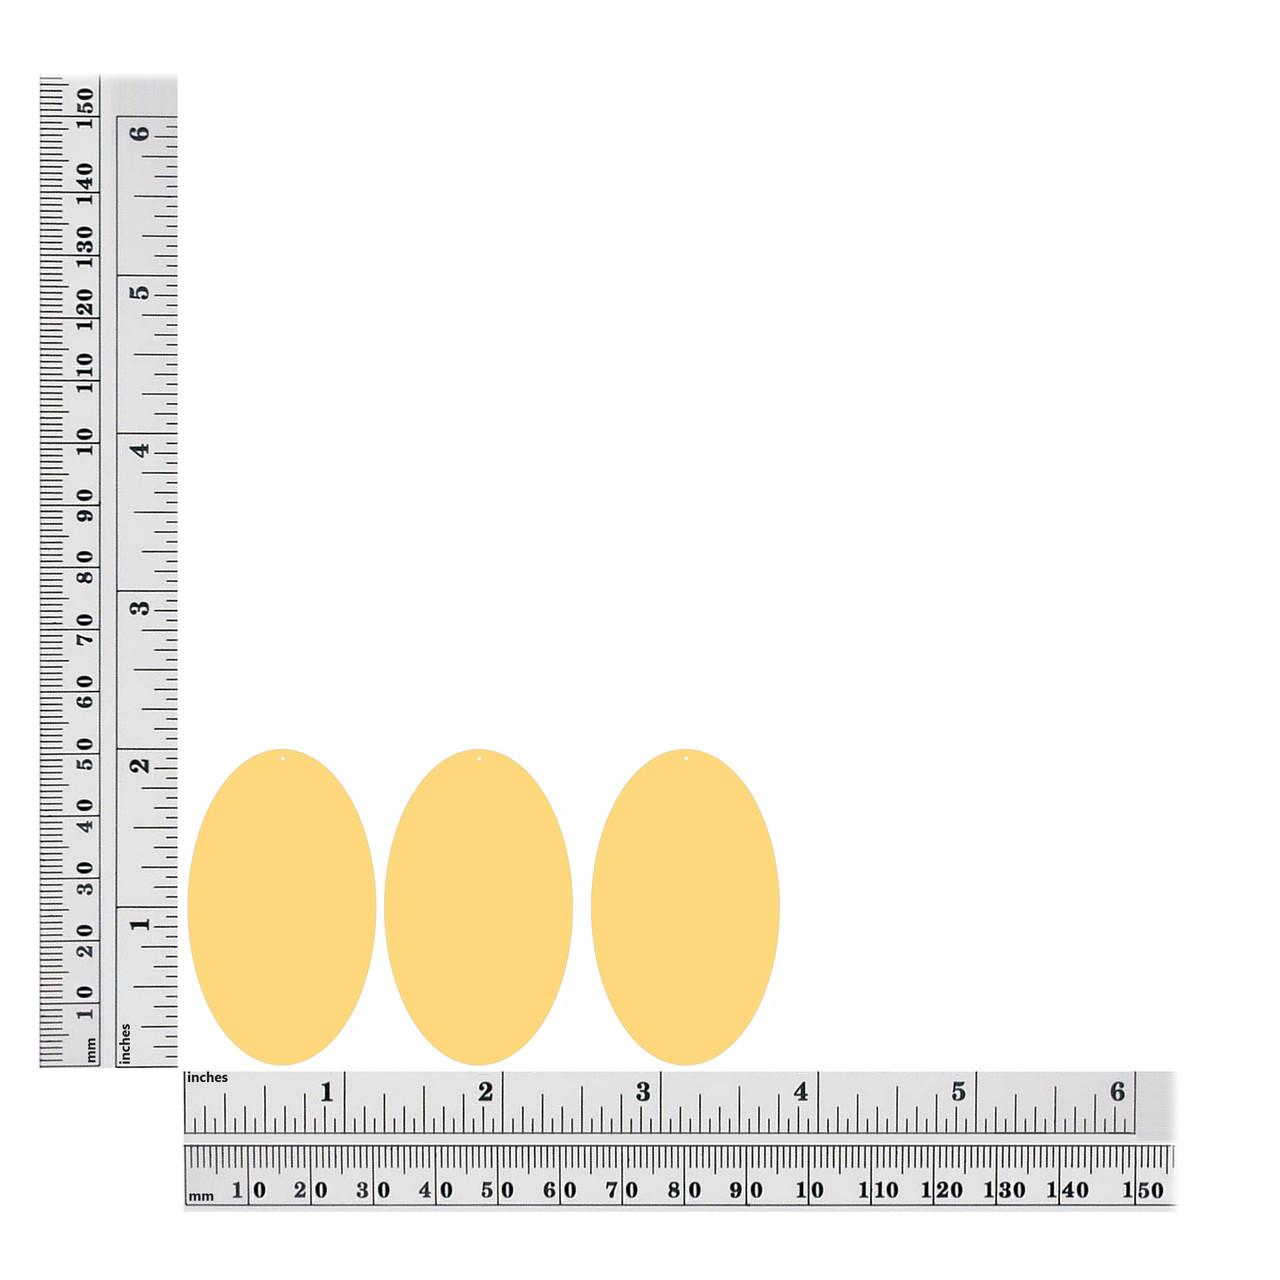 Oval sequins size chart